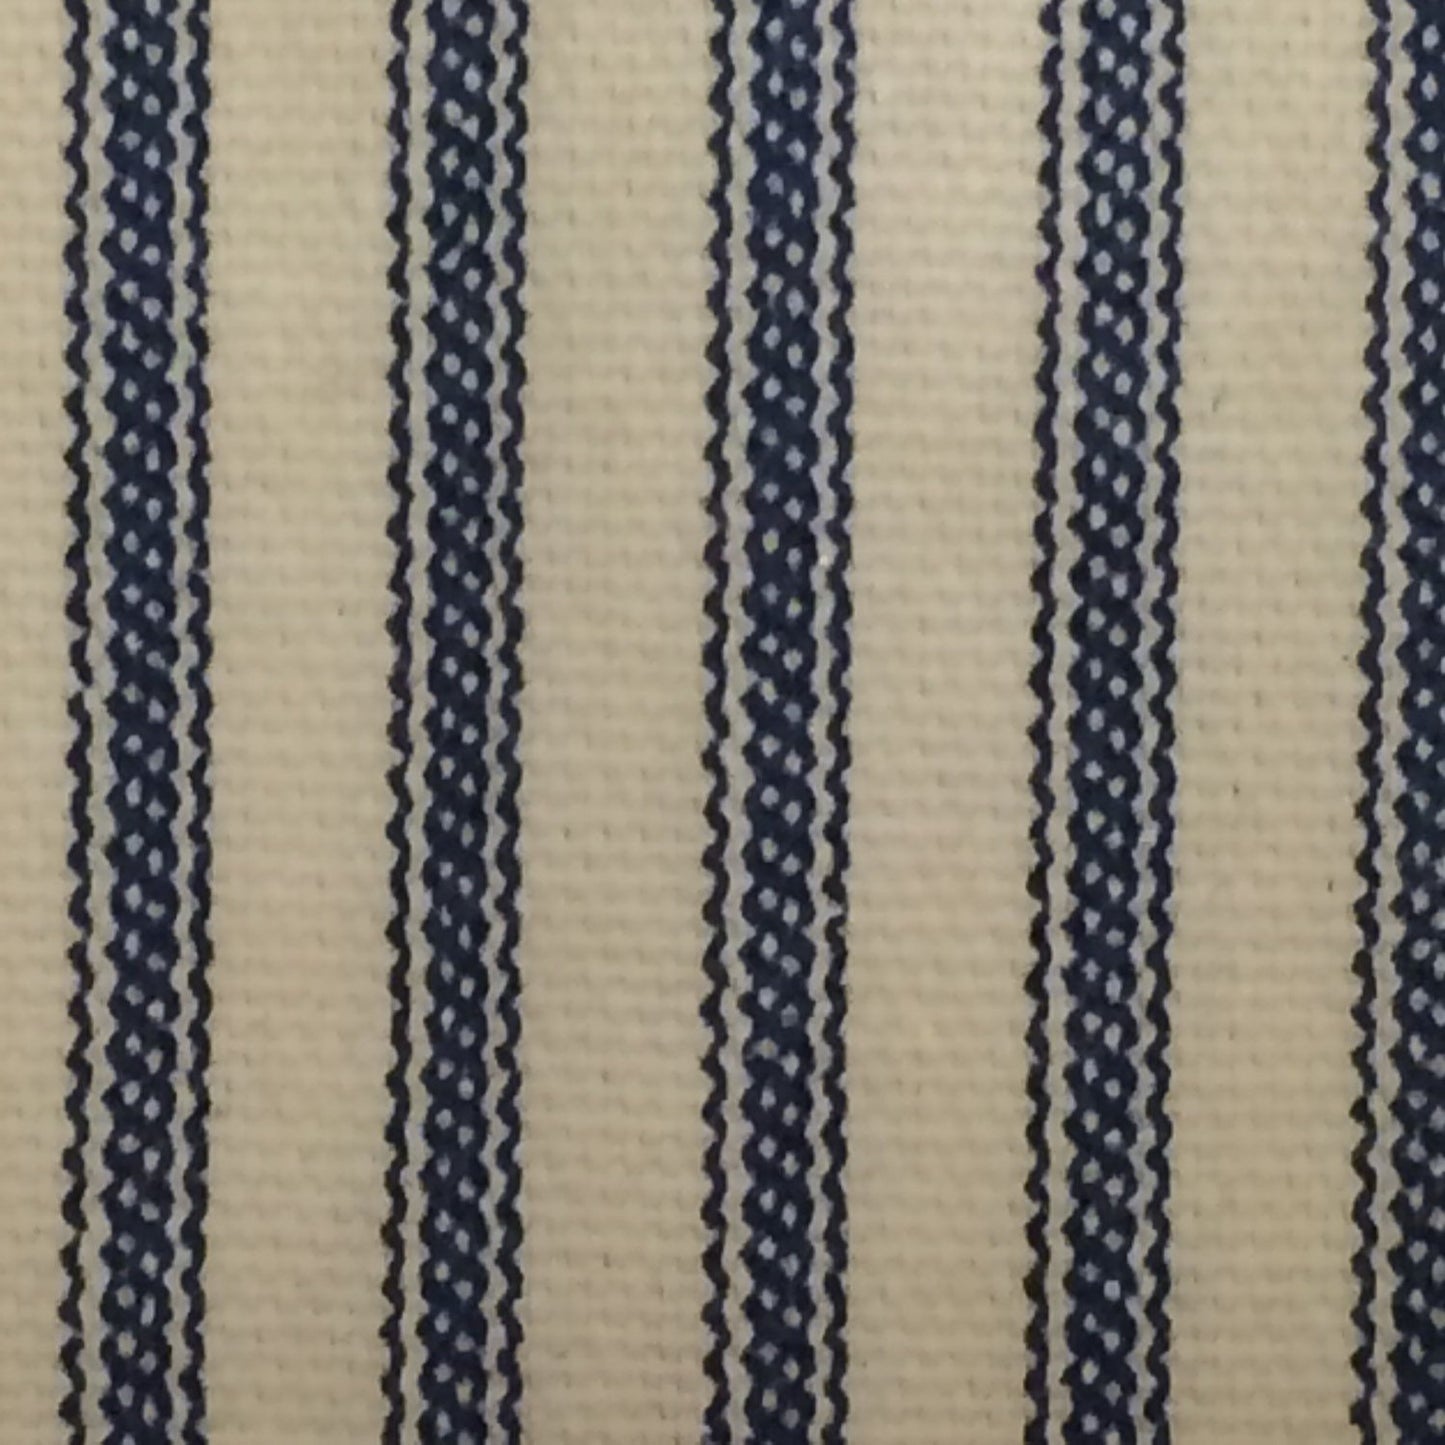 Ticking Stripe Curtain Panel | 5 Colors Available